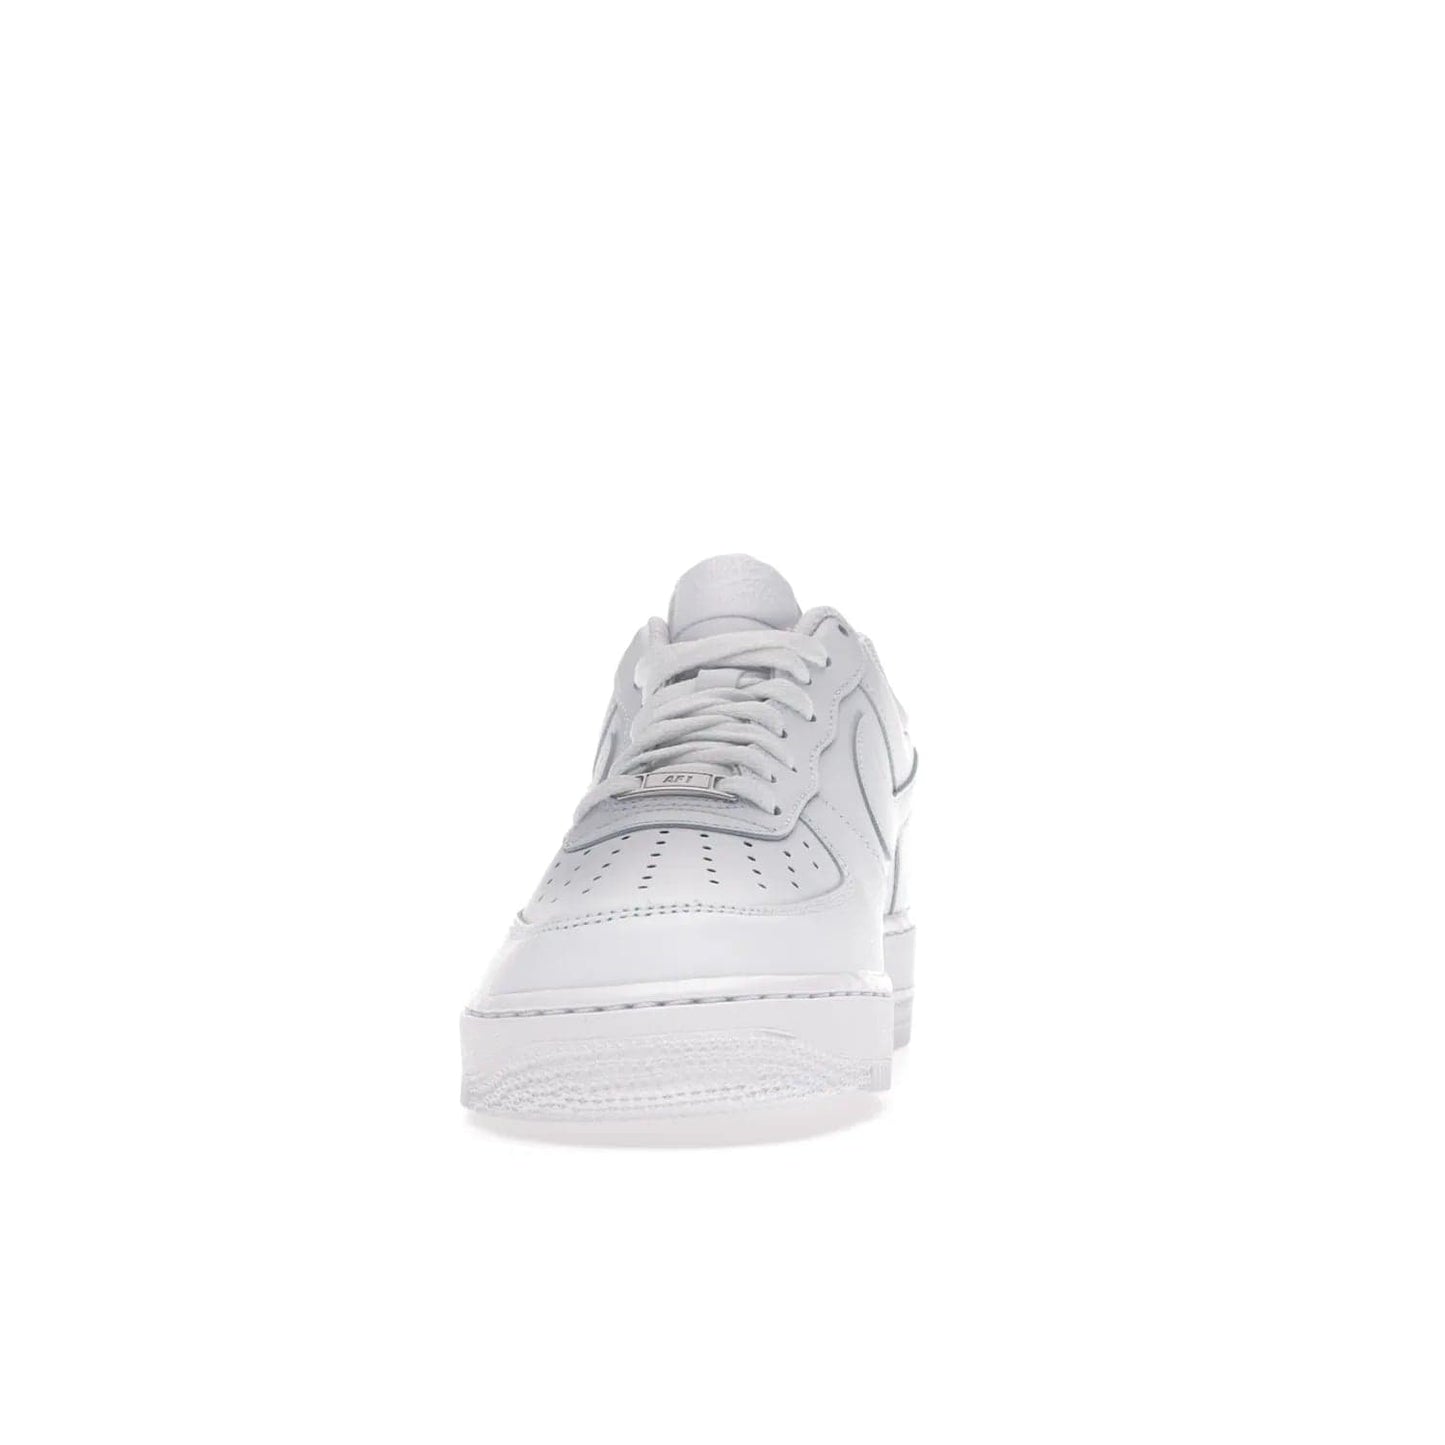 Nike Air Force 1 Low '07 White - Image 11 - Only at www.BallersClubKickz.com - ##
Iconic Swoosh overlays and crisp white sole make the classic Nike Air Force 1 Low White '07 an essential colorway. Classic for seasoned heads and new fans alike.